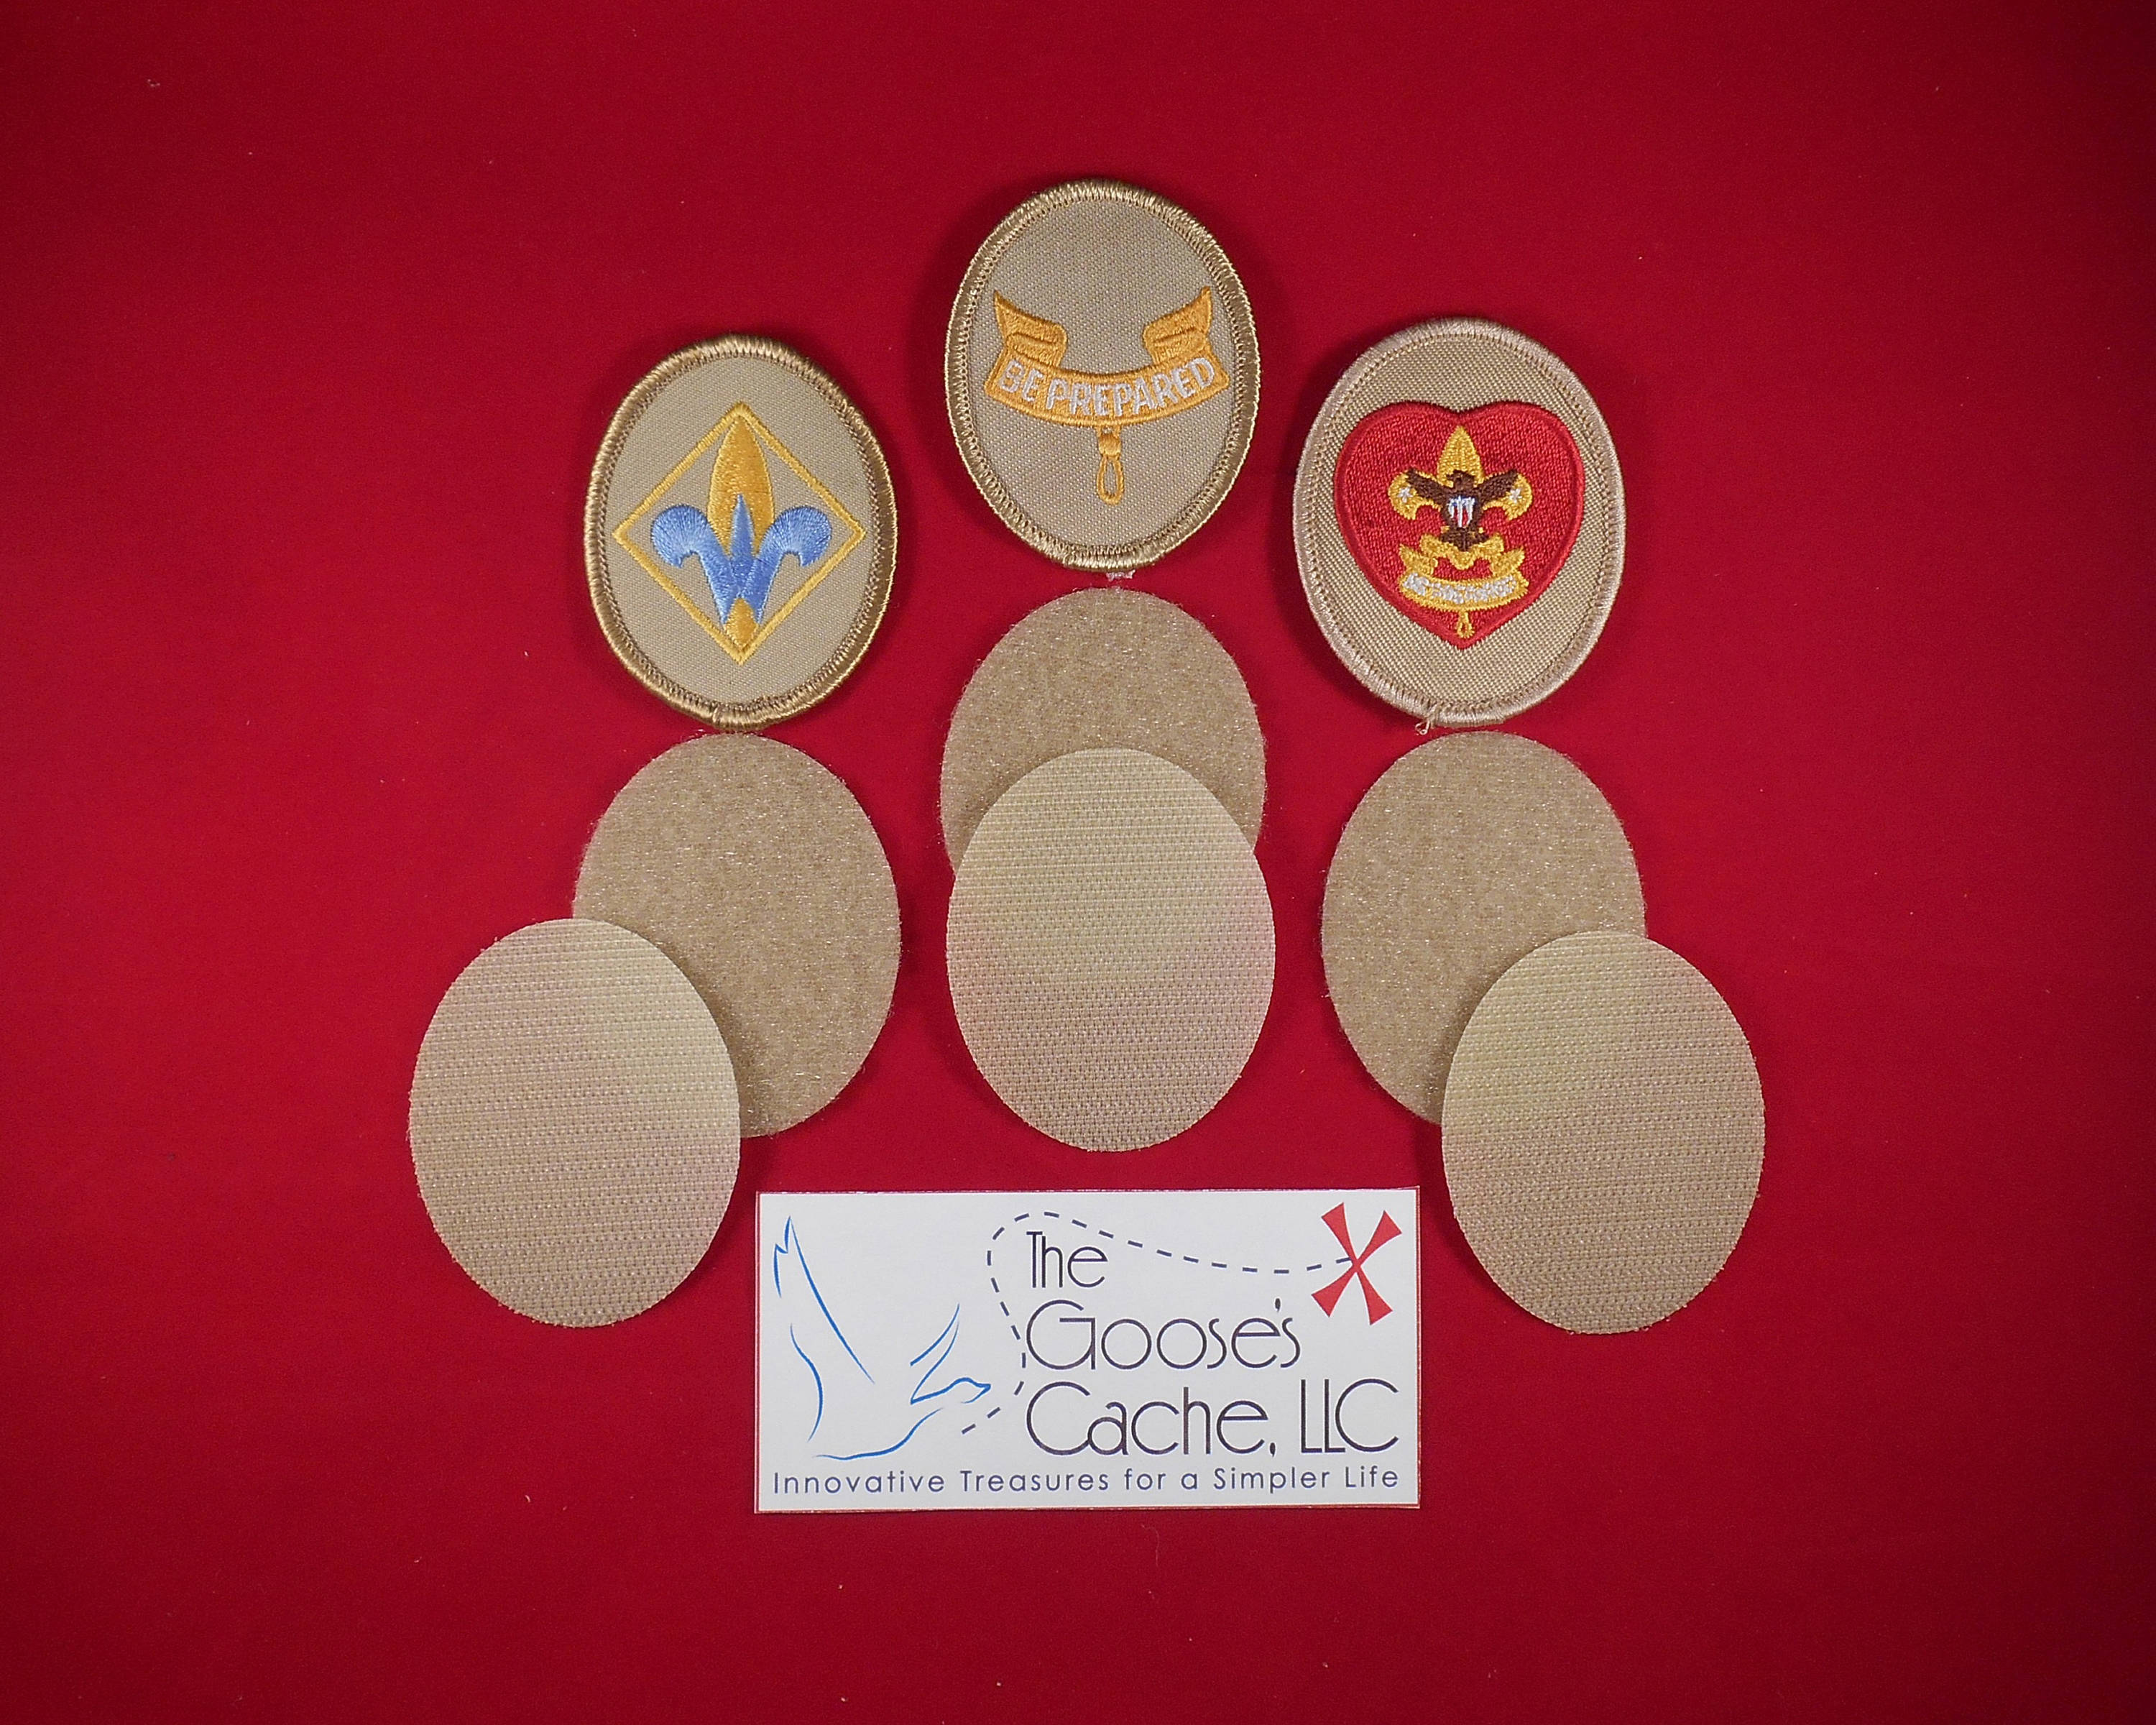 Tan Sew-on VELCRO® Brand Set for Attaching Patches to Scouts BSA Shirts